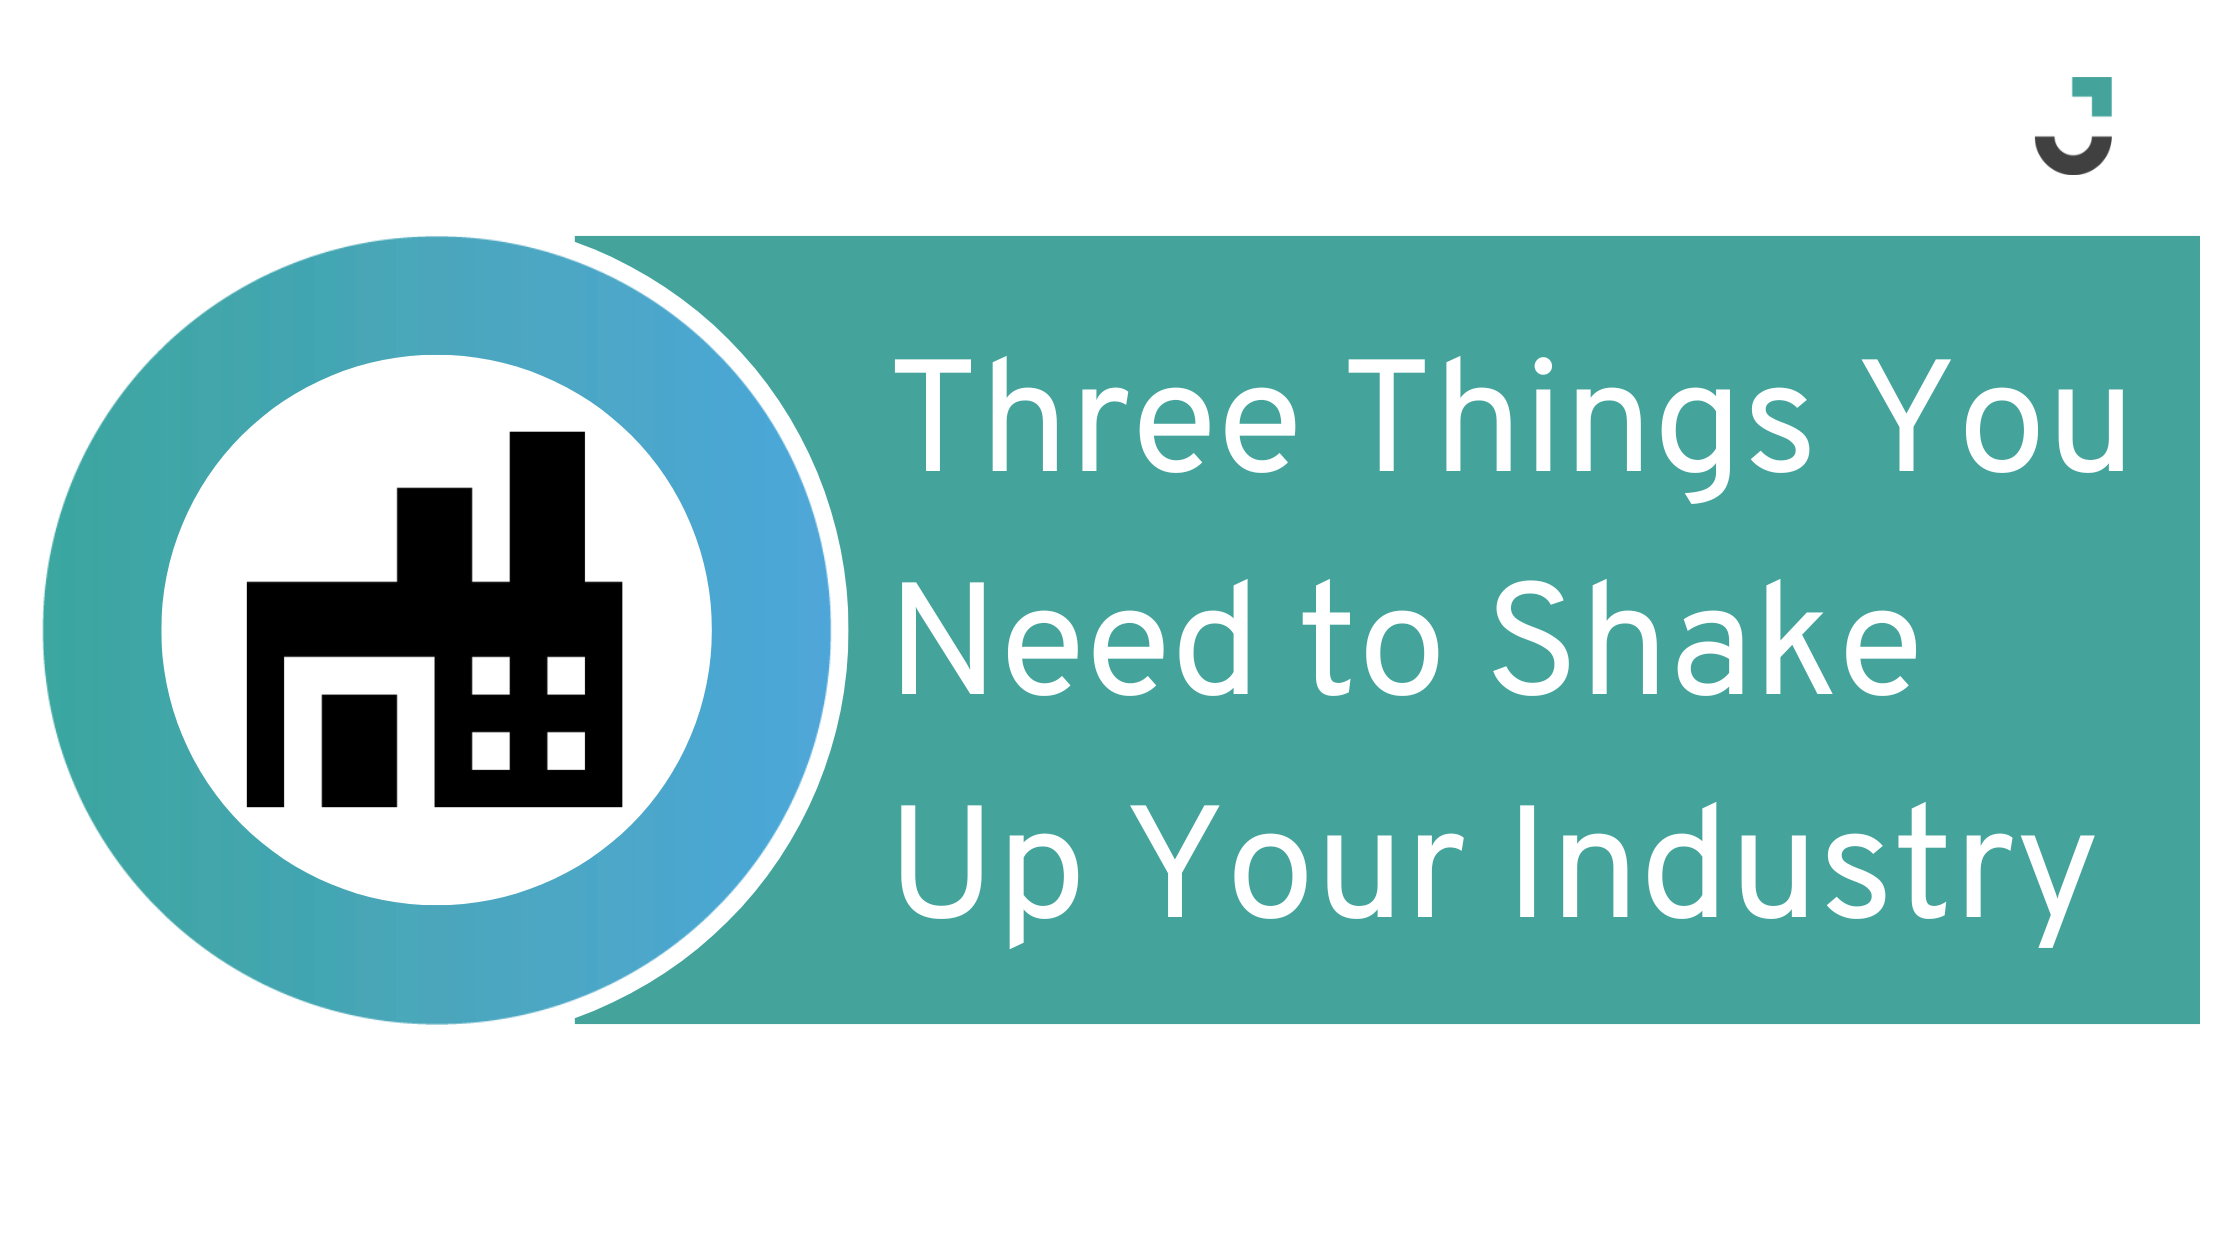 Three Things You Need to Shake Up Your Industry